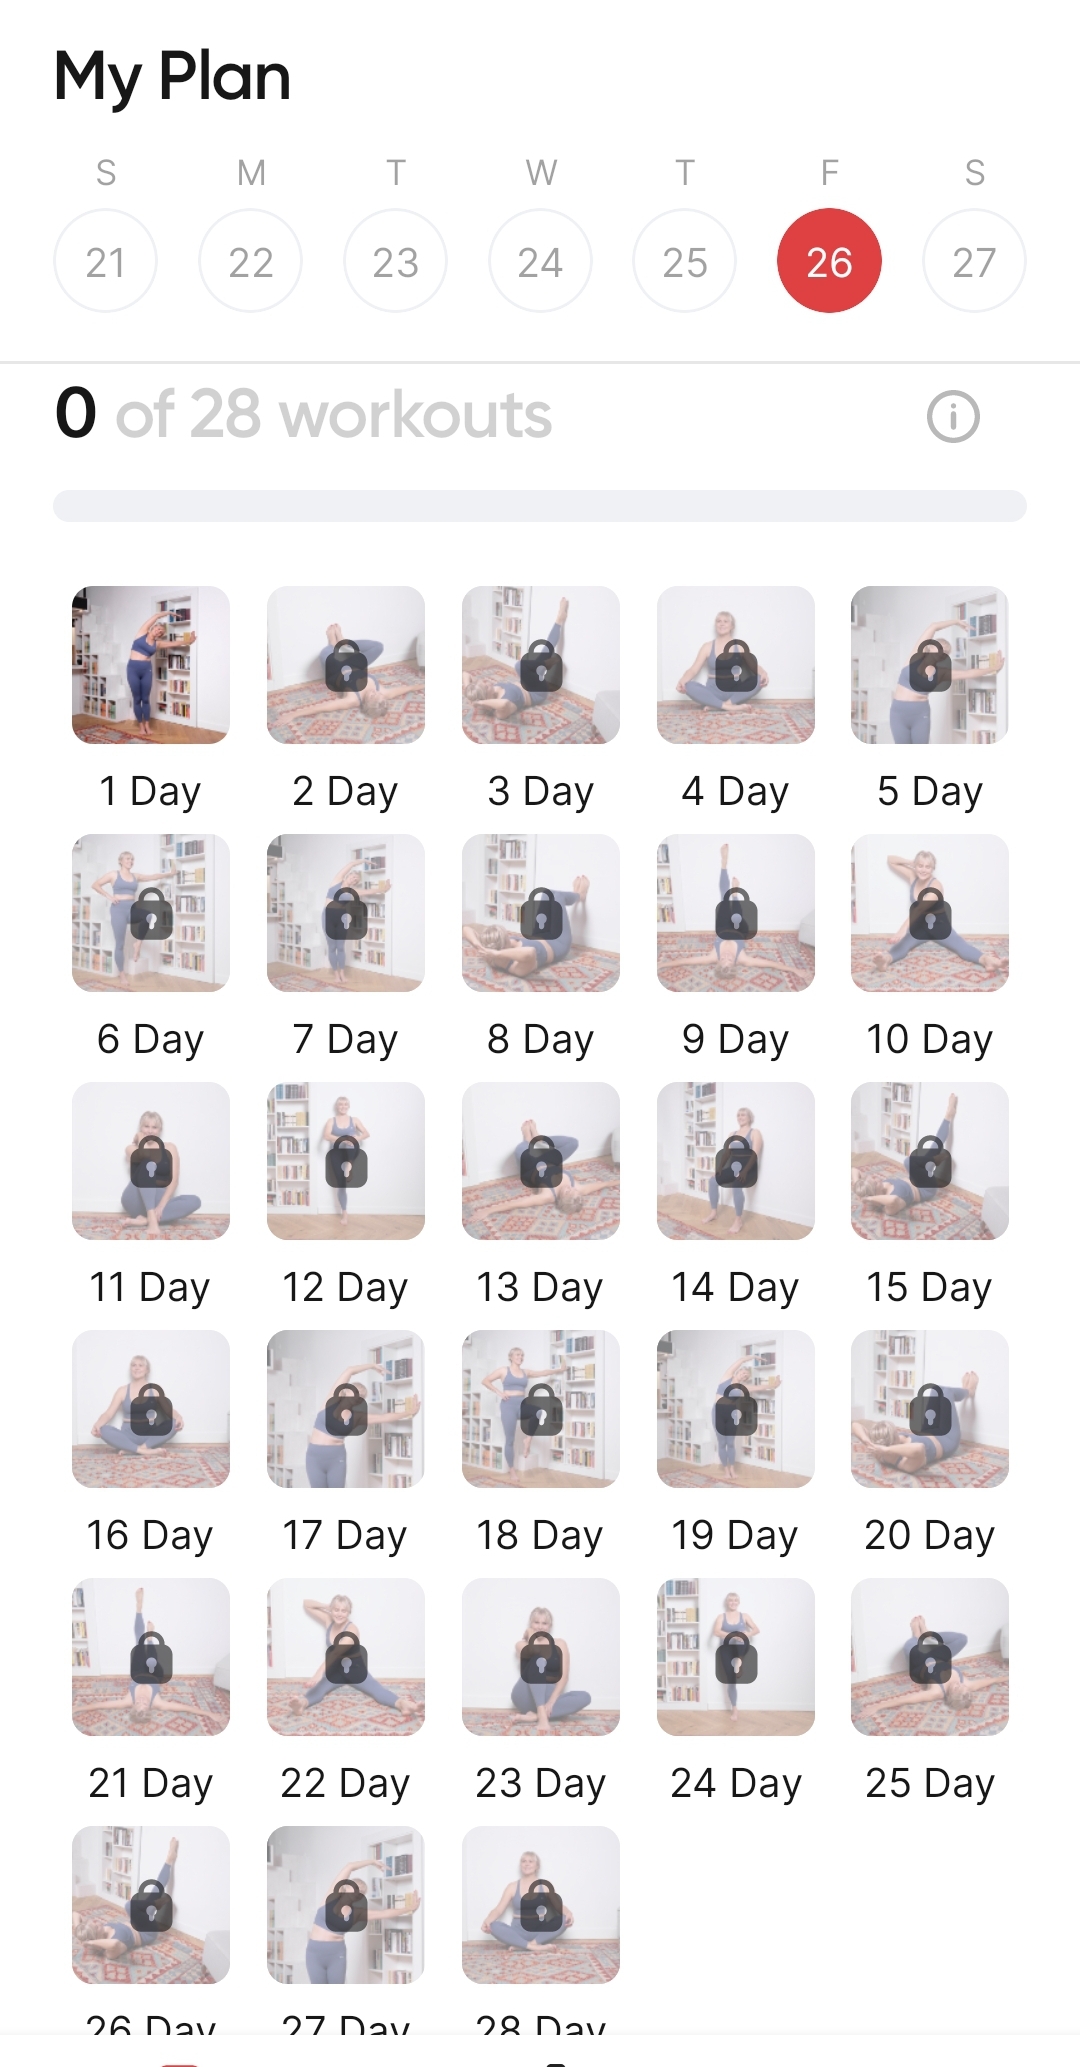 Pilates Wall Workout Chart: A Quick Guide For Beginners - BetterMe